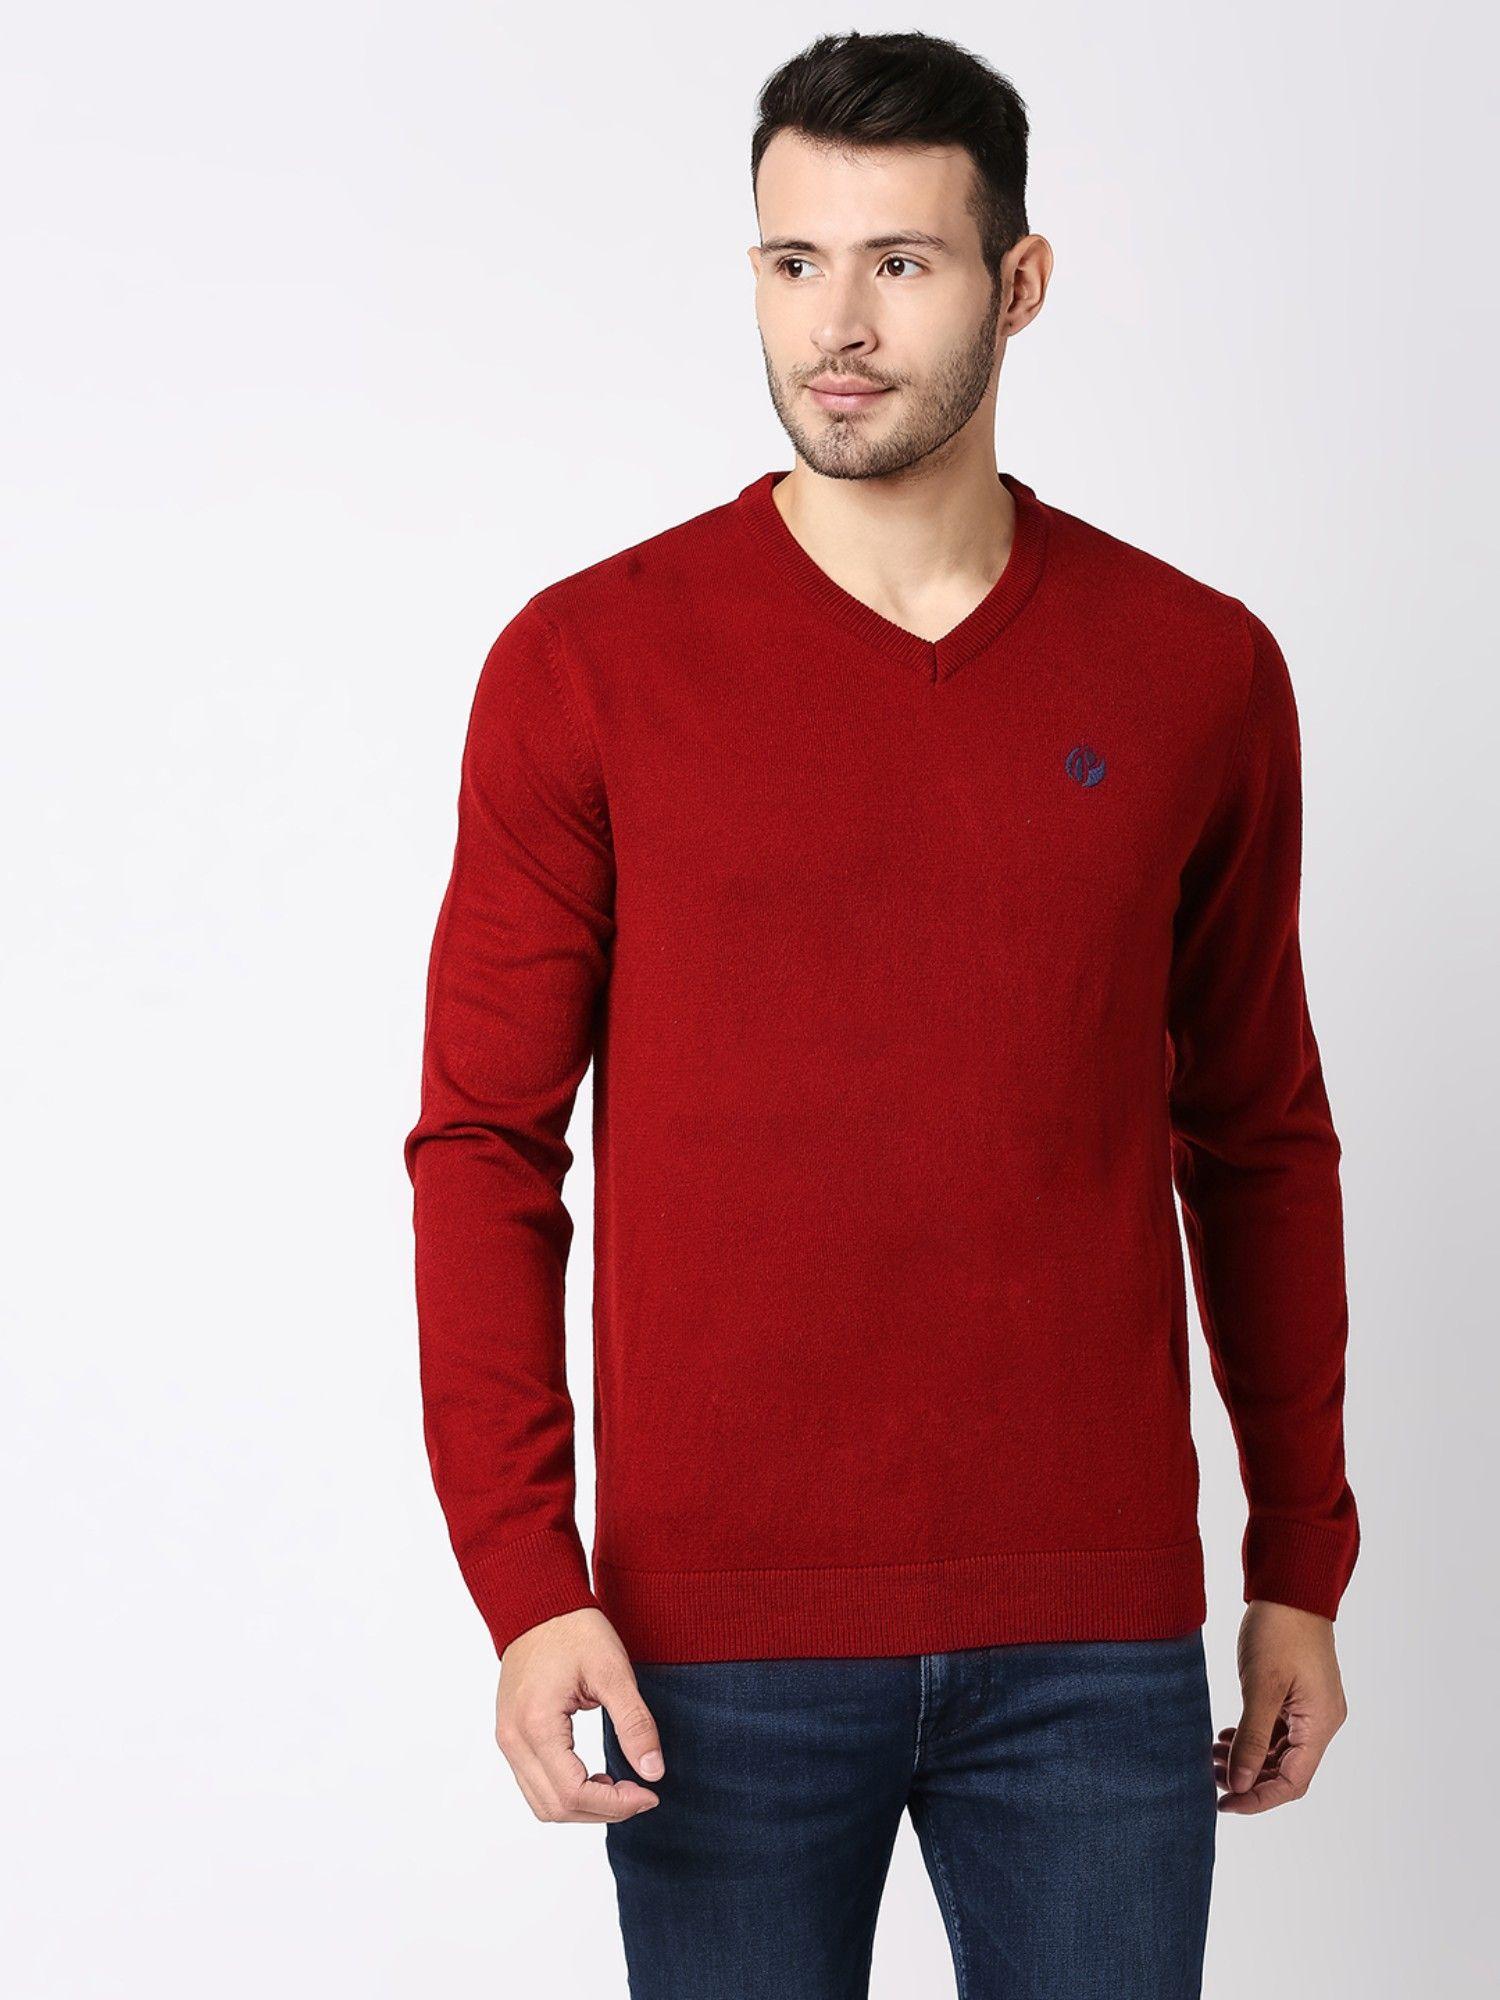 supremo-light-acro-wool-red-sweater